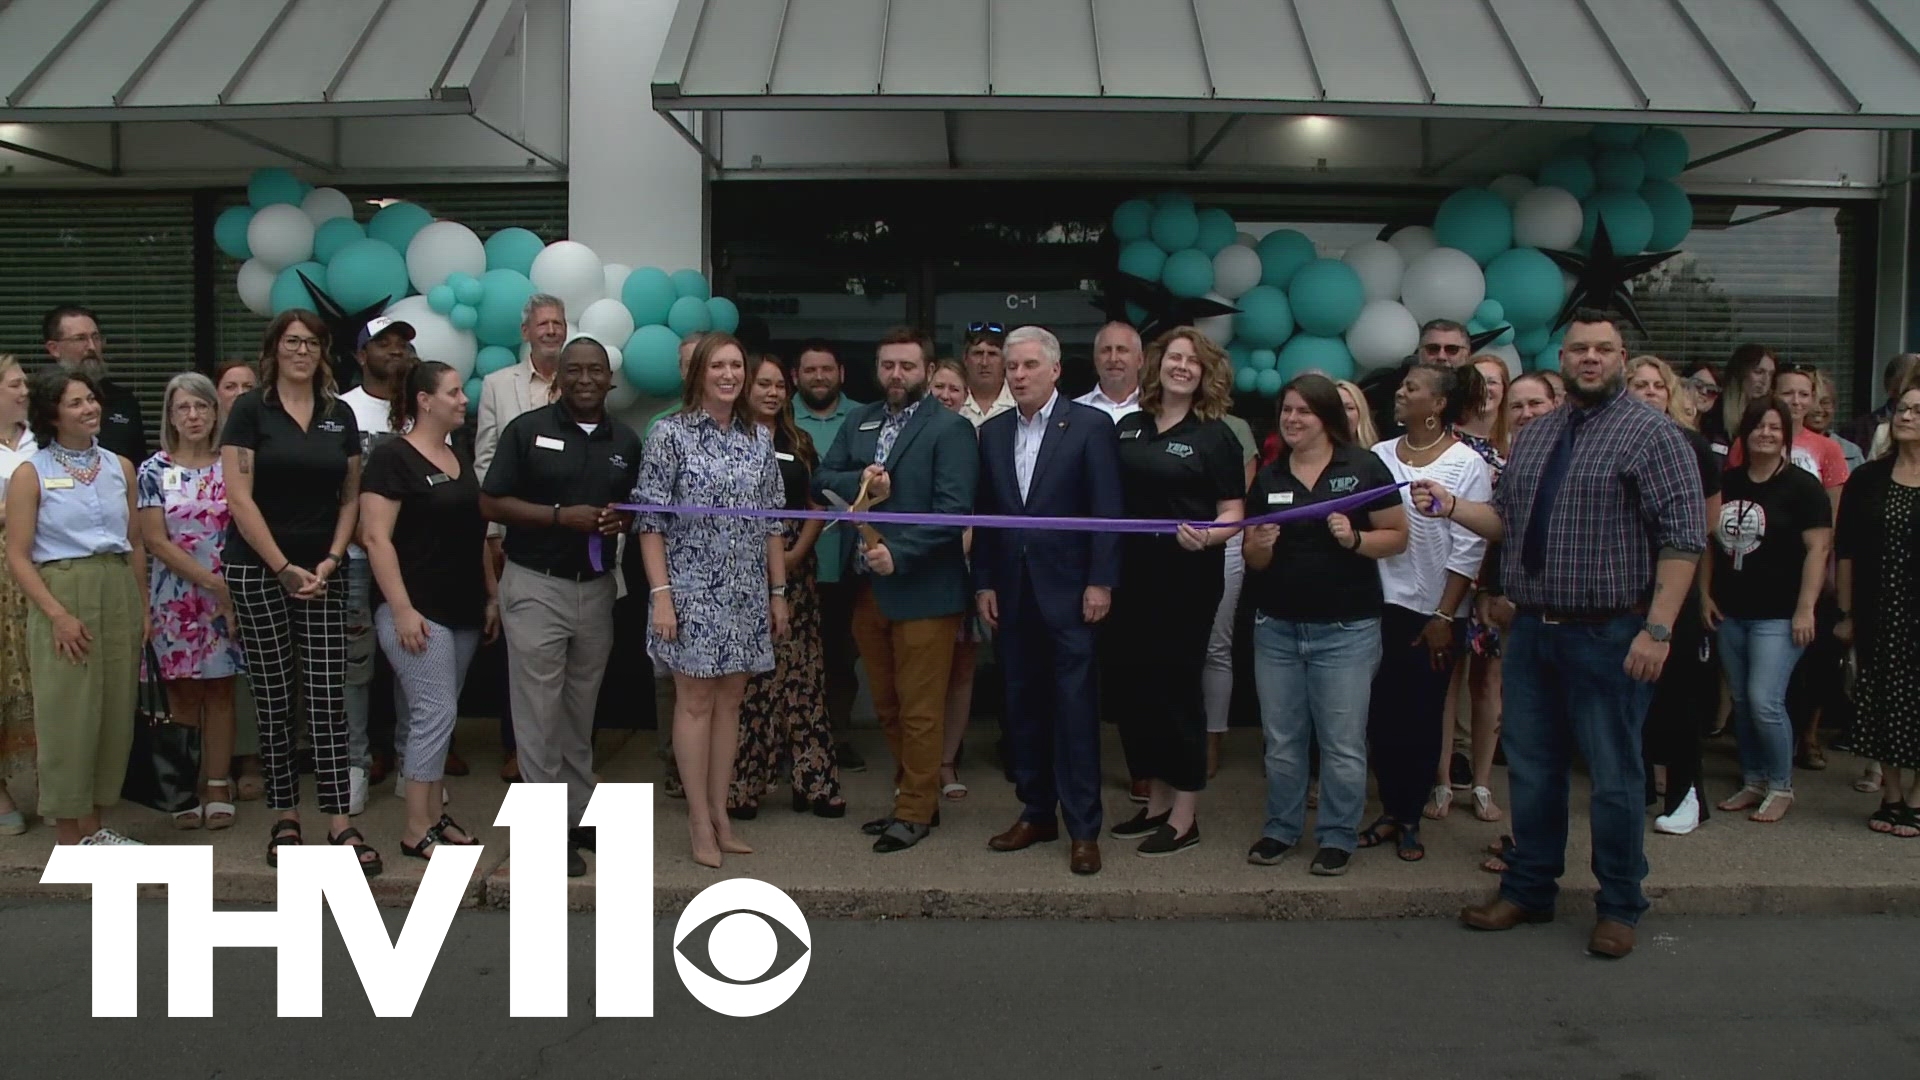 A Little Rock facility opened its doors for the first time with one goal in mind—saving a generation from substance abuse and mental health problems.